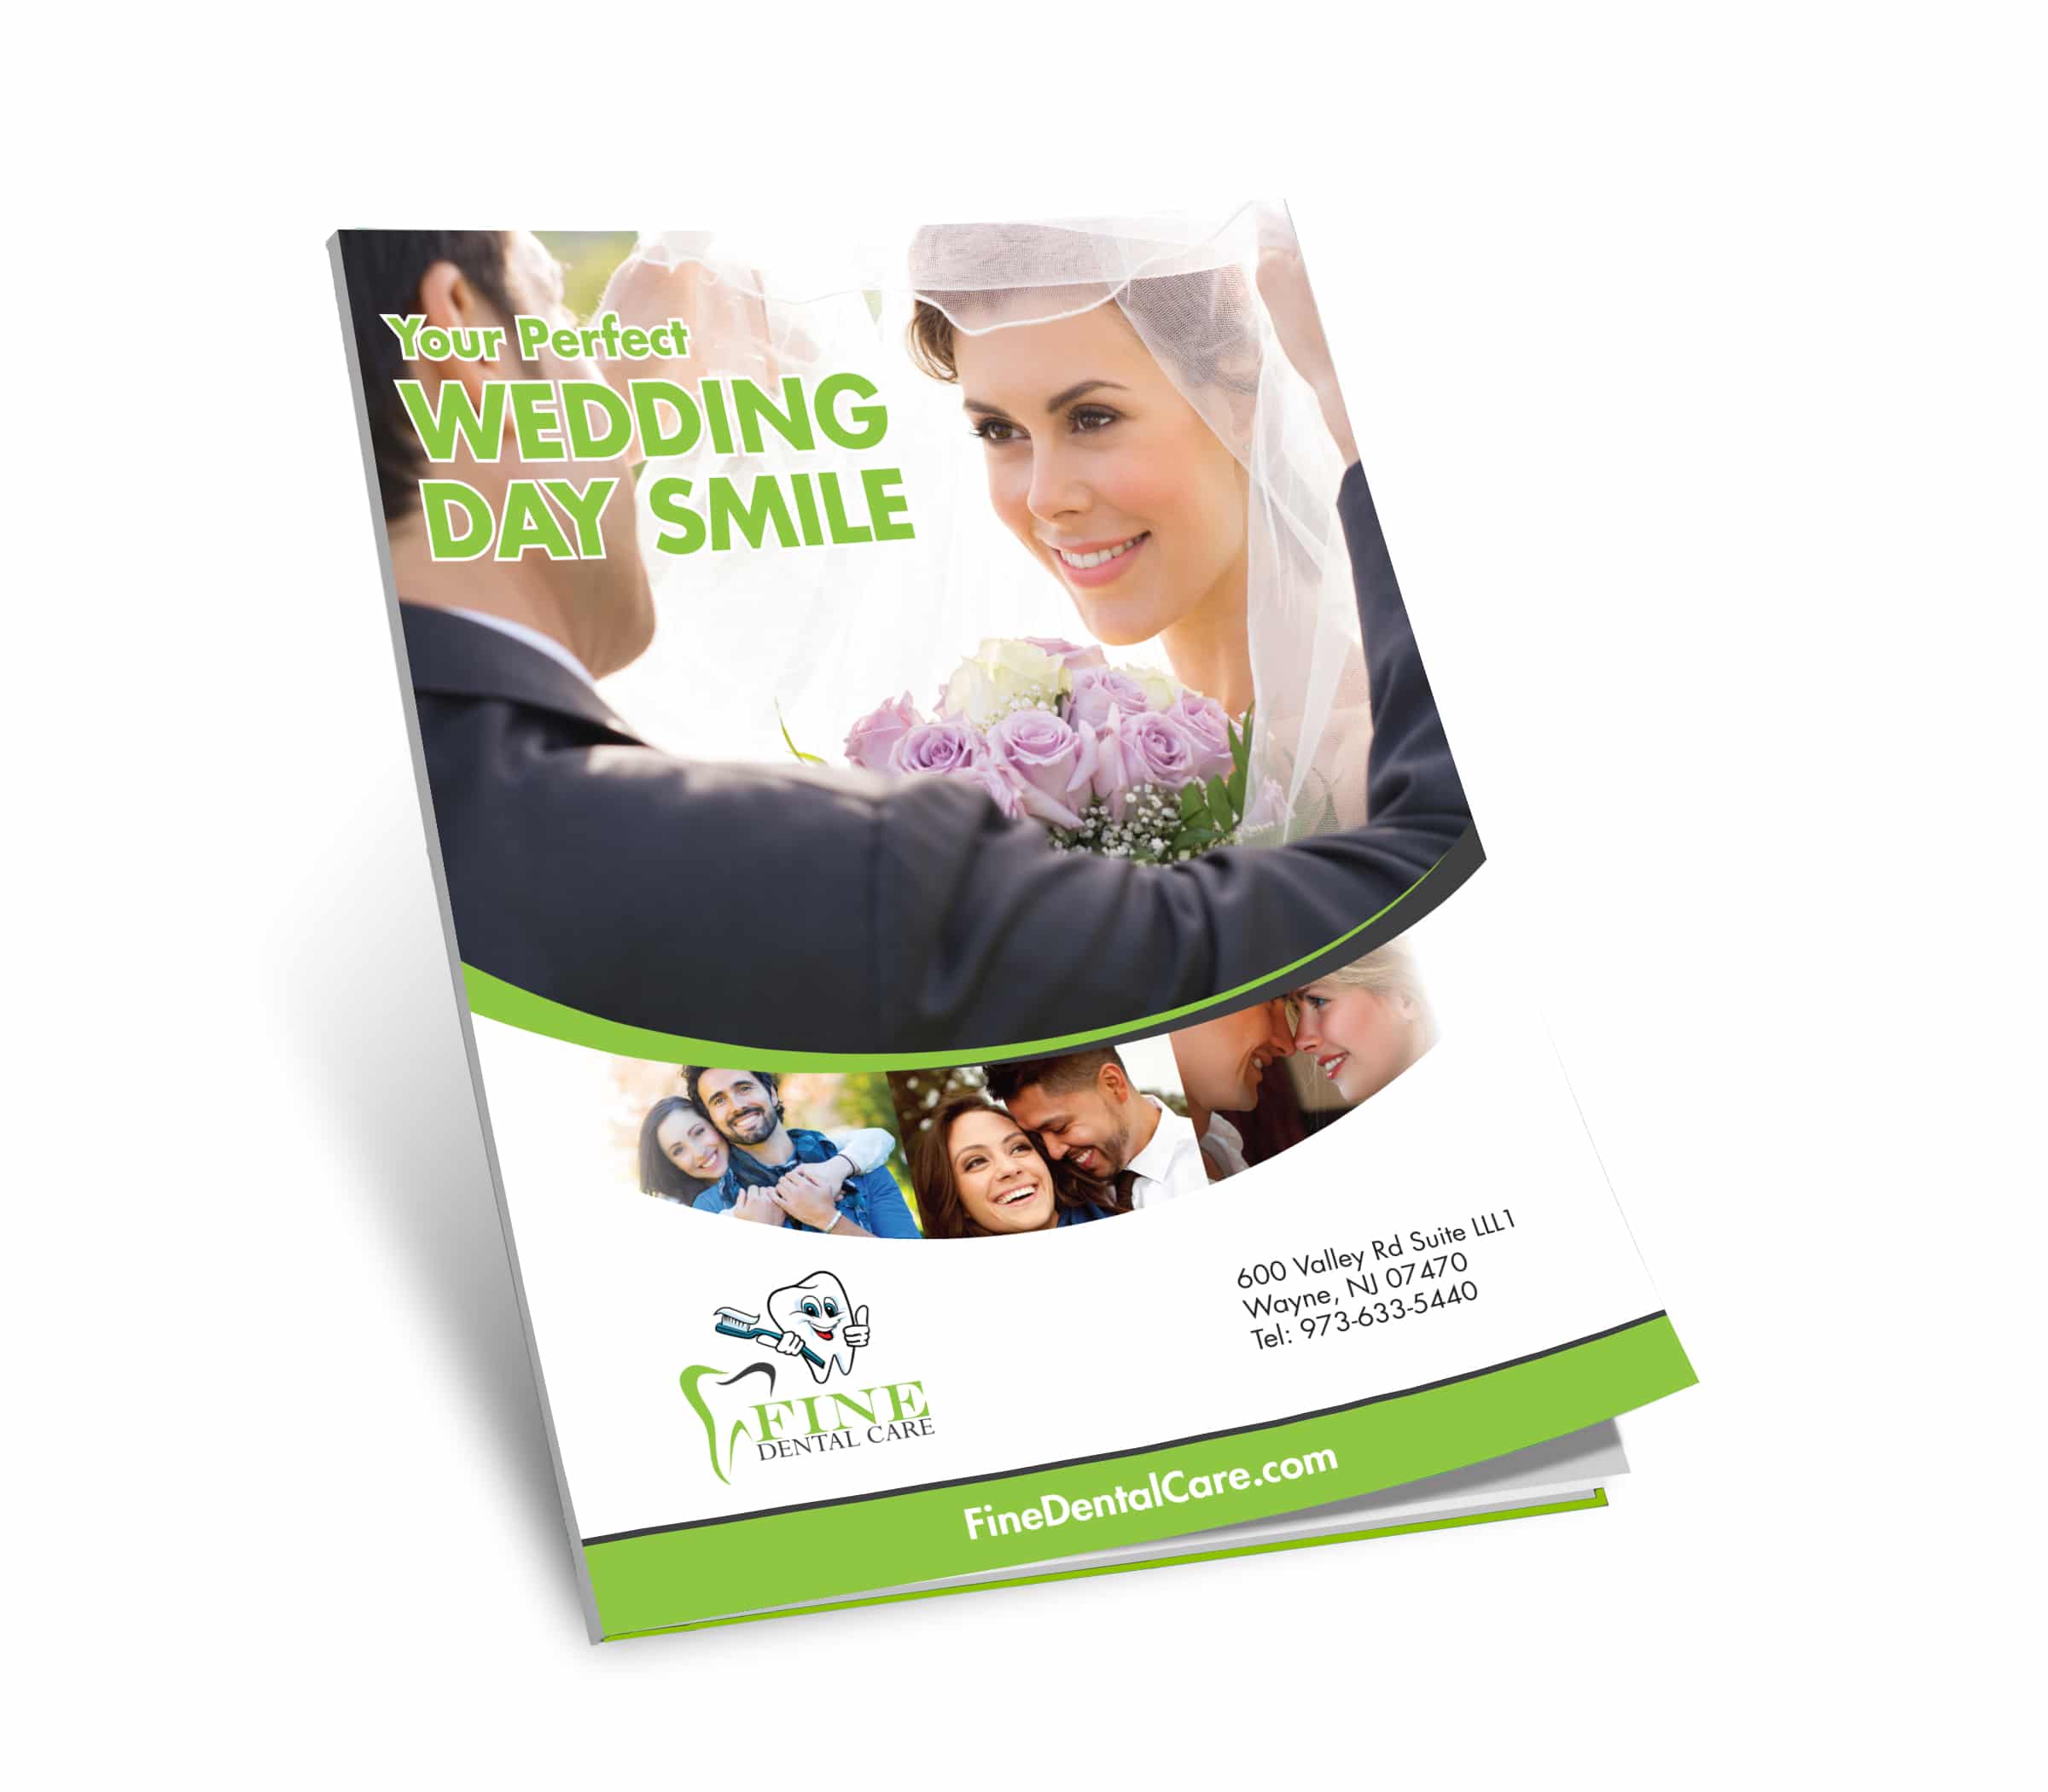 Your Perfect Wedding Day Smile